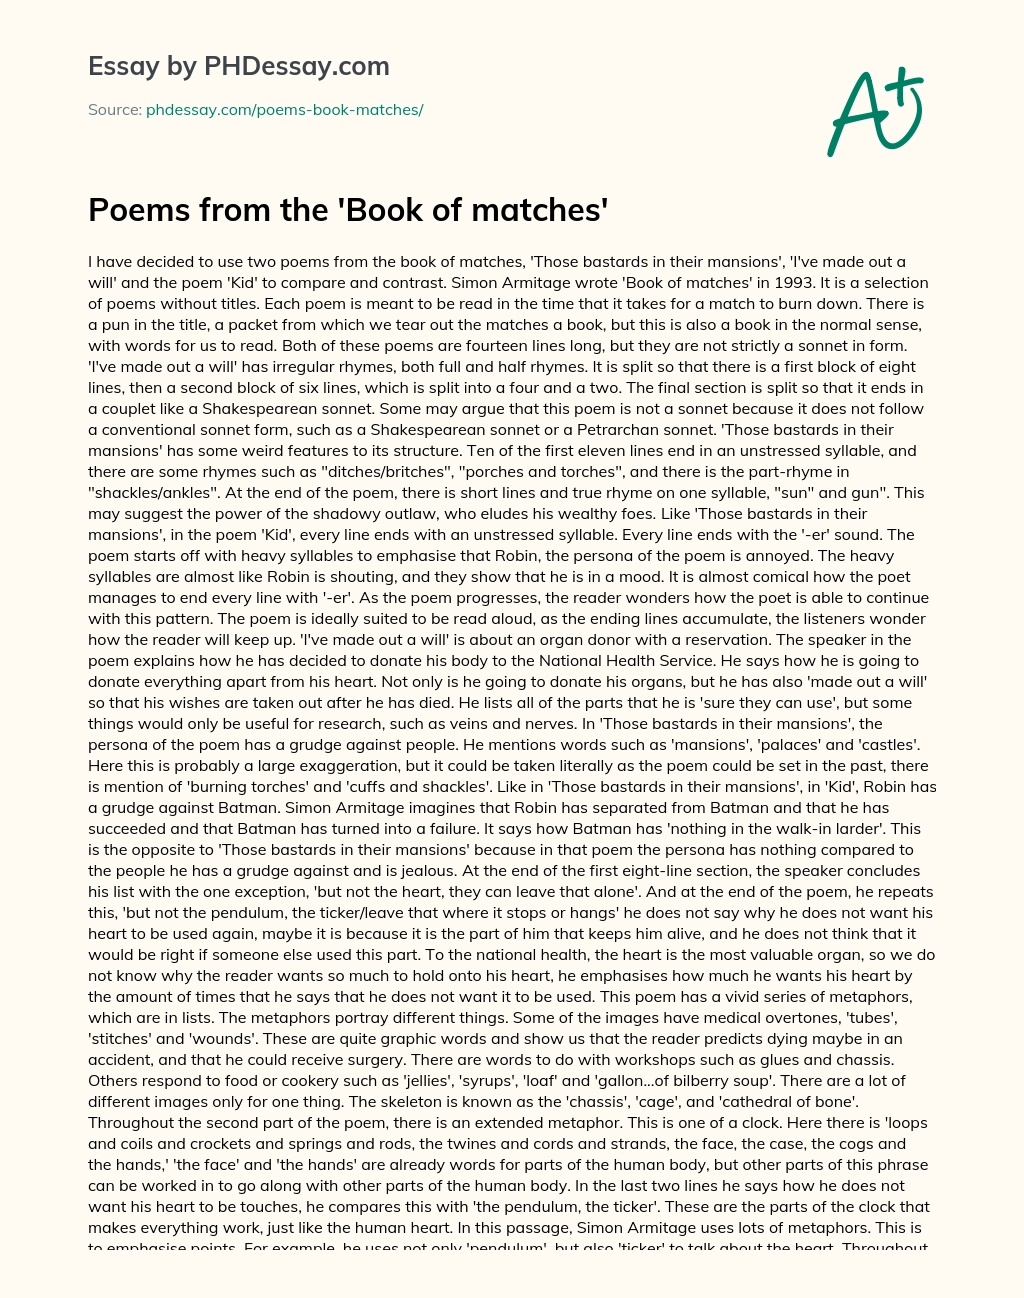 Poems from the ‘Book of matches’ essay